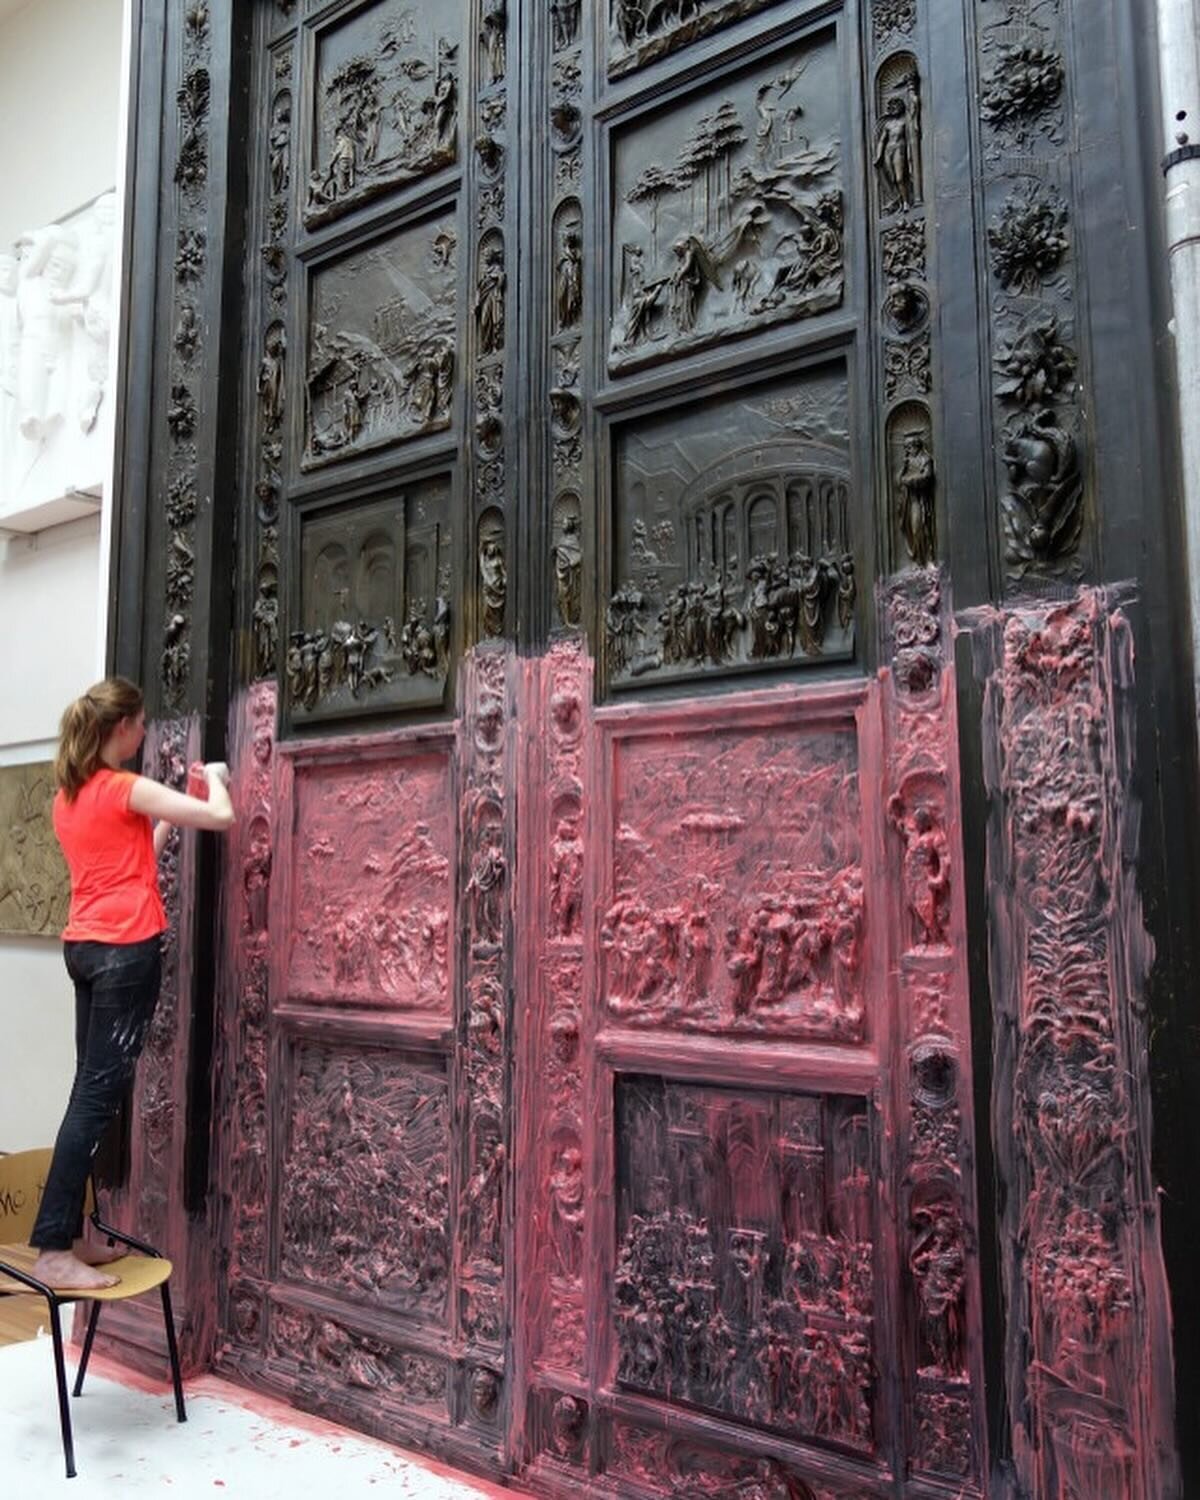 How it all started&hellip; ❤️❤️❤️
Casting the gates of Paradise at the Royal academy of Art. 

@royalacademyofart.thehague 

In 1921 the then director of the Royal Academy of Art bought a copy of the world famous &lsquo;Porta del Paradiso&rsquo; door